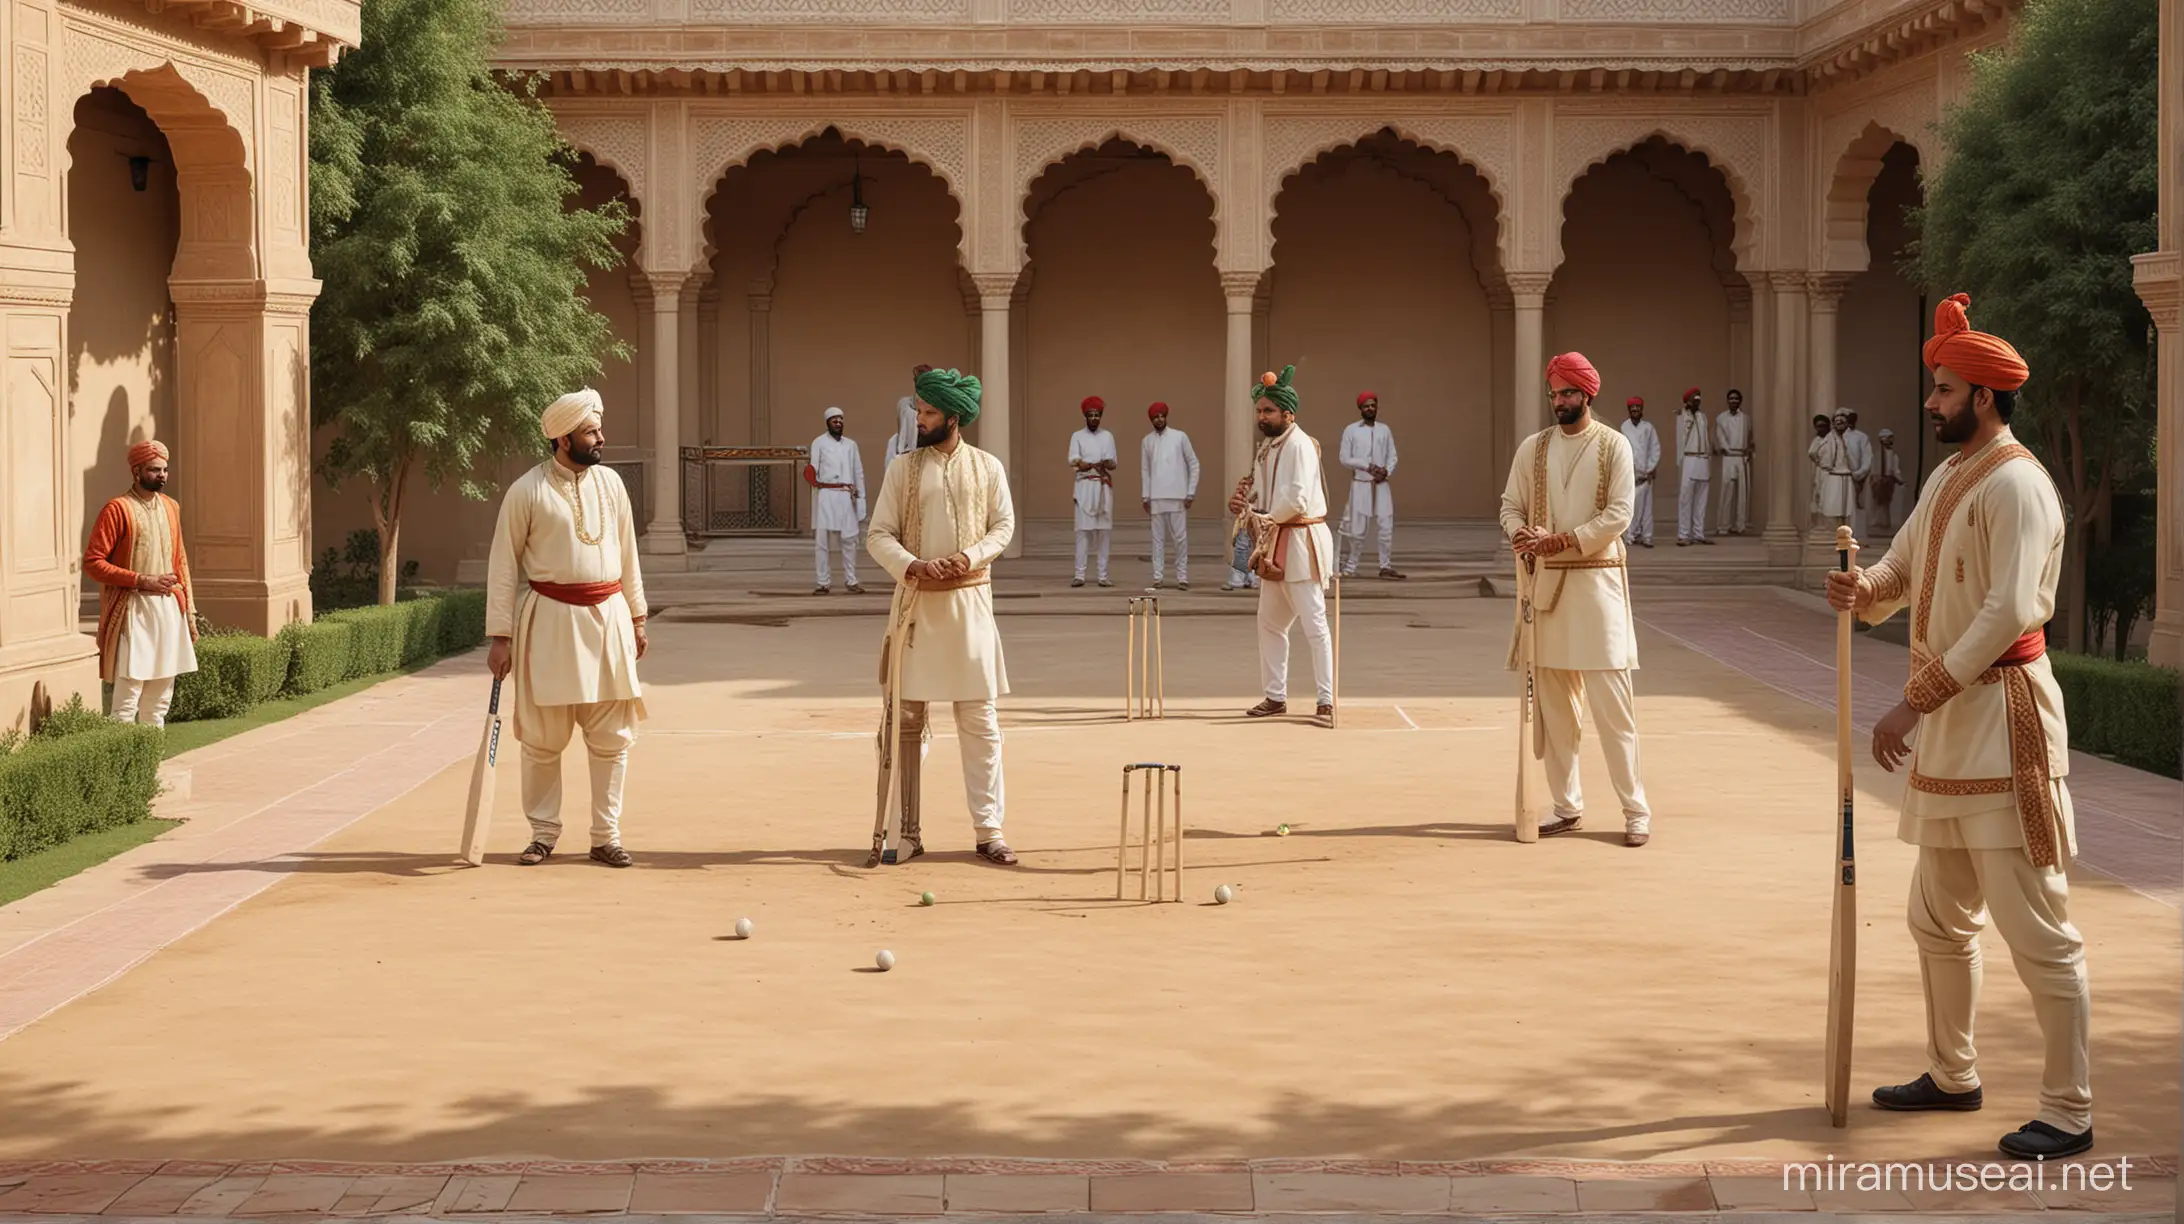 AI image depicting Mughal kings playing cricket. Show them dressed in traditional Mughal attire, playing cricket in a royal garden or palace courtyard. Include elements like vintage cricket equipment and a sense of regal competition to blend historical imagery with a modern sport